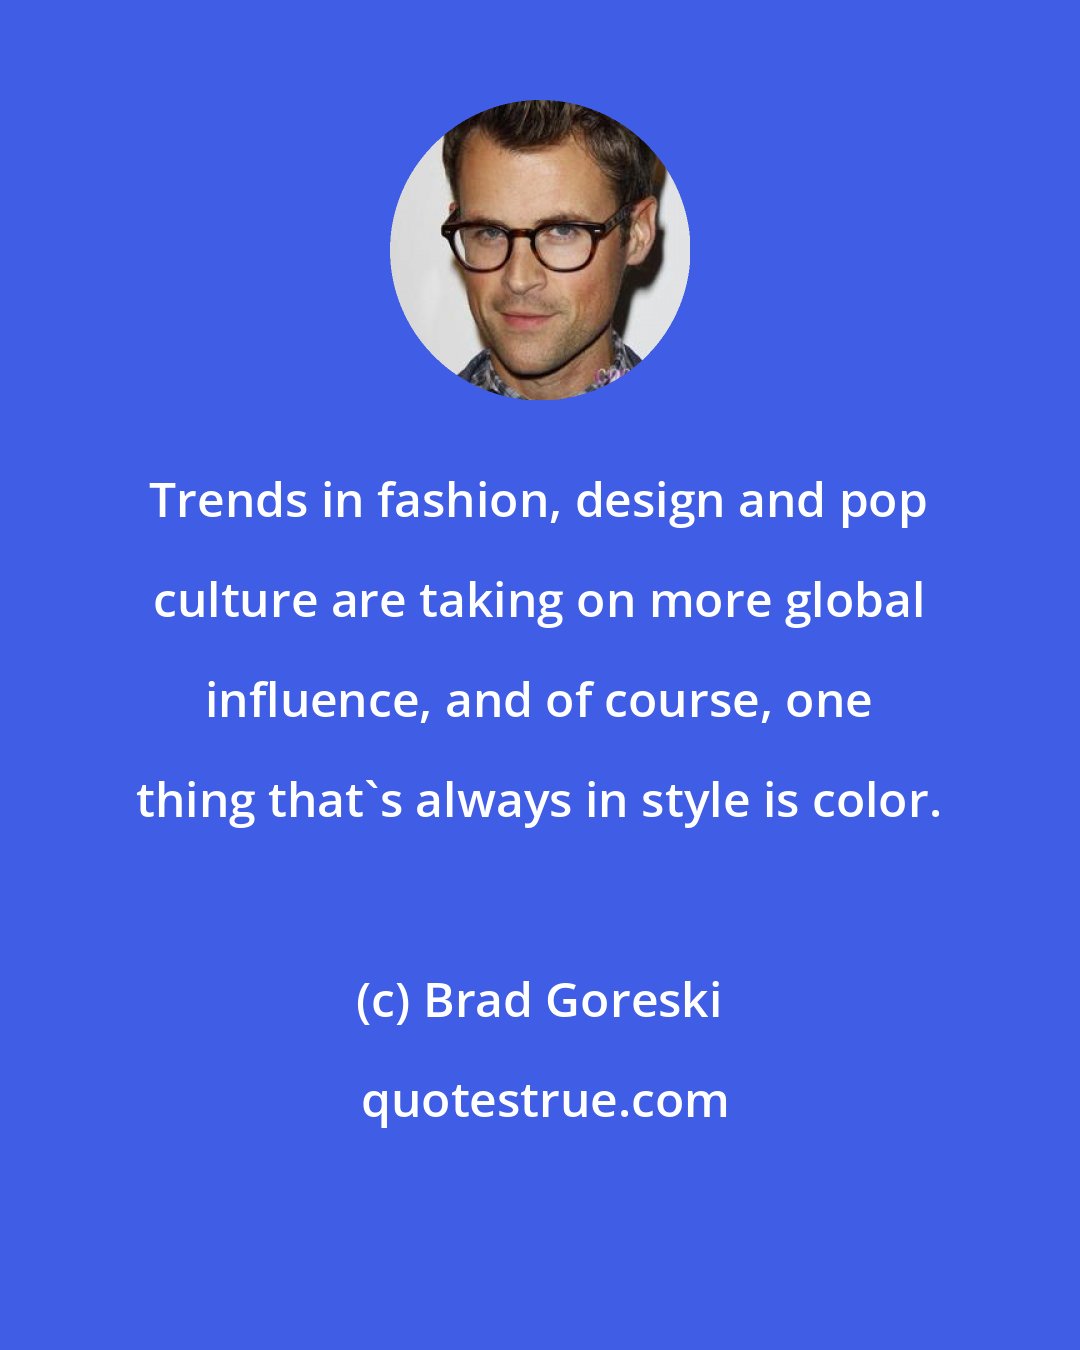 Brad Goreski: Trends in fashion, design and pop culture are taking on more global influence, and of course, one thing that's always in style is color.